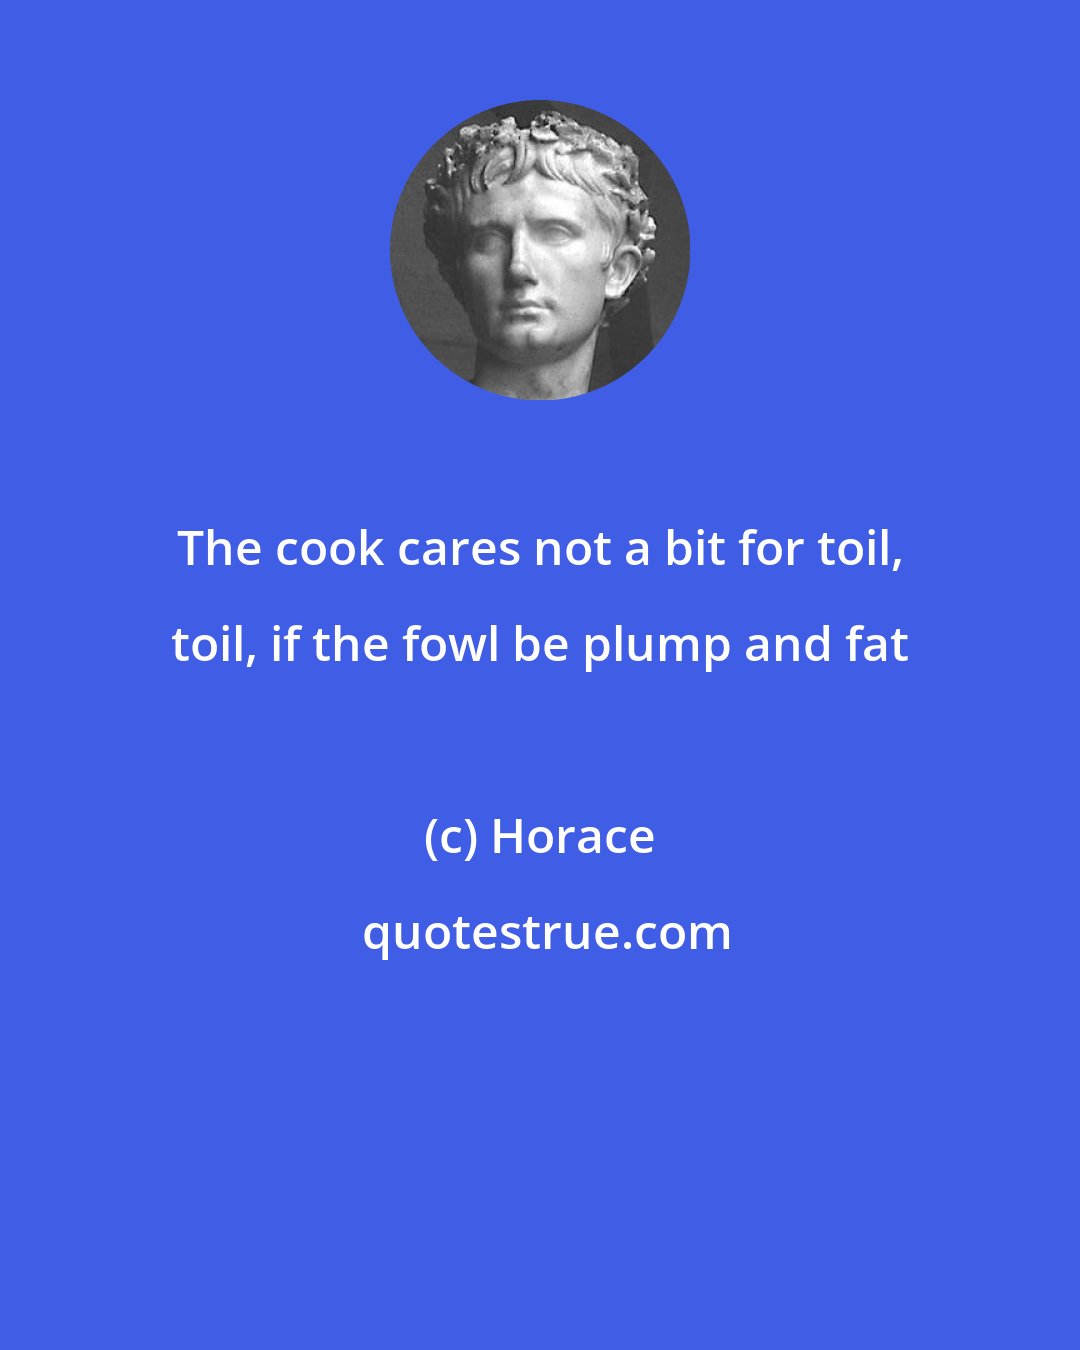 Horace: The cook cares not a bit for toil, toil, if the fowl be plump and fat